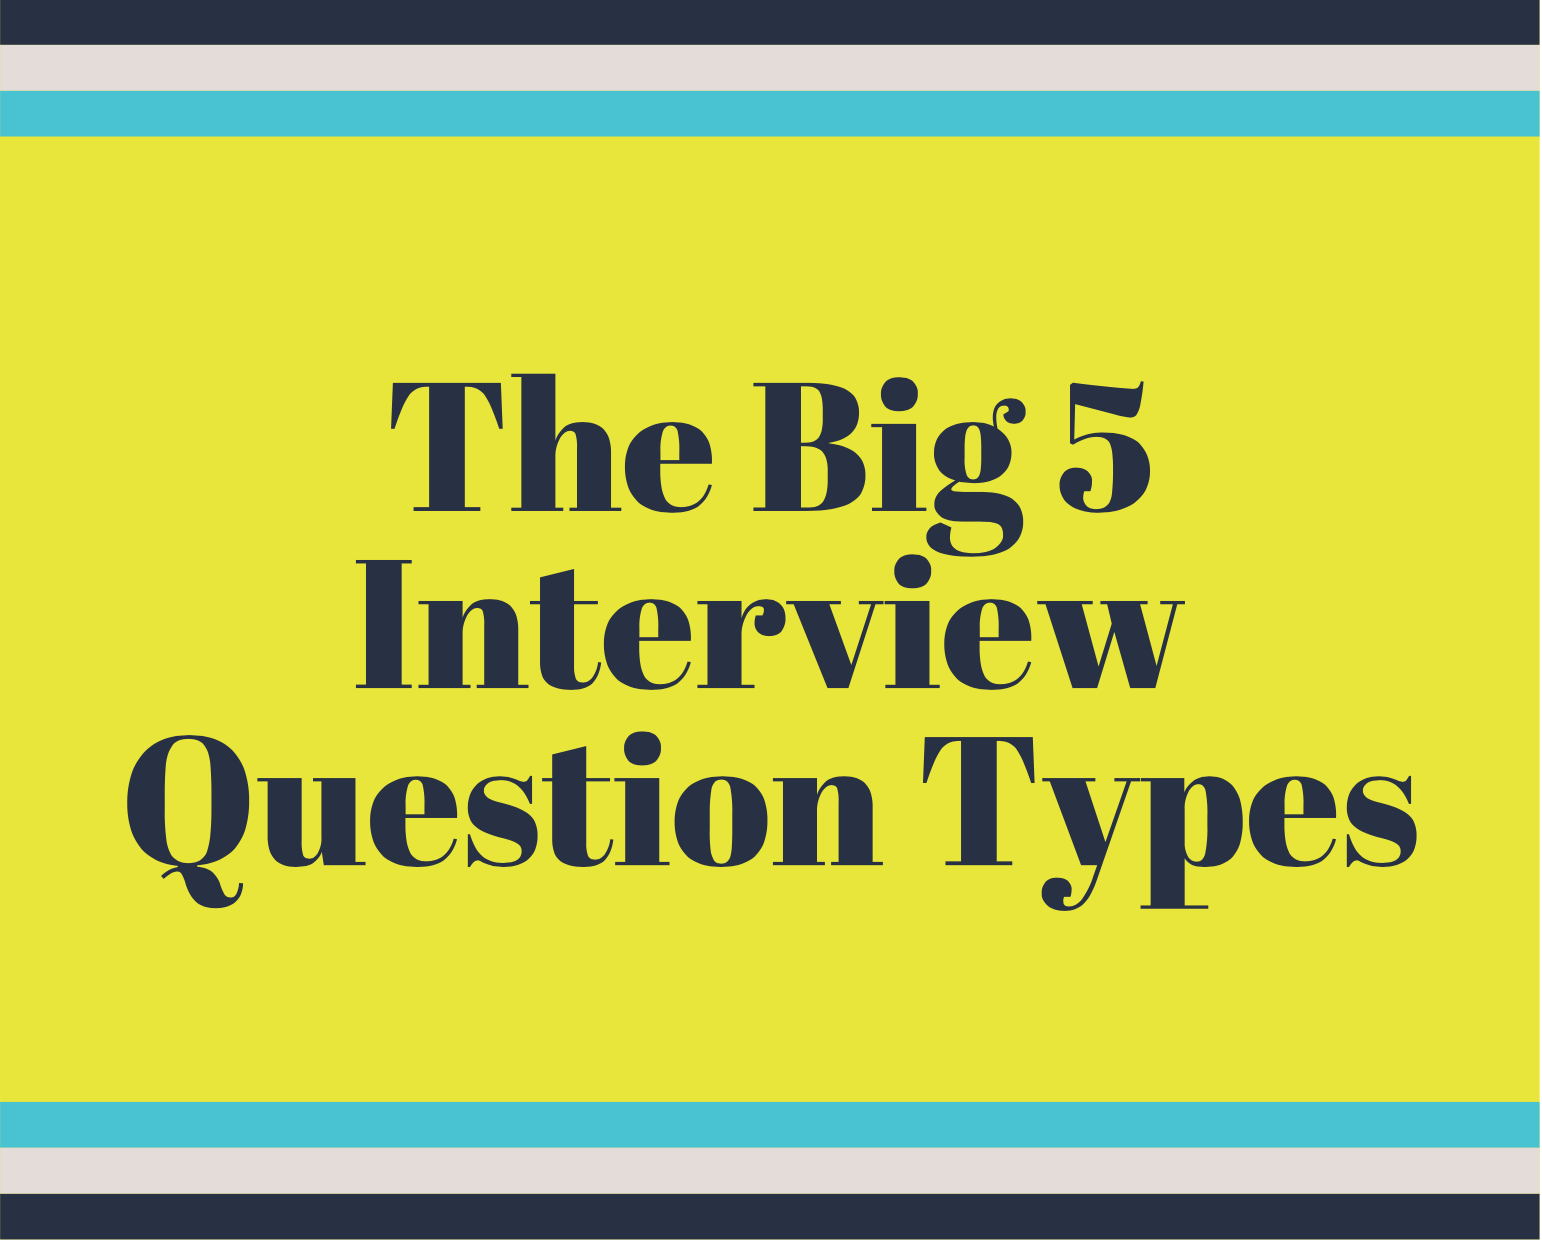 The big 5 interview question types text